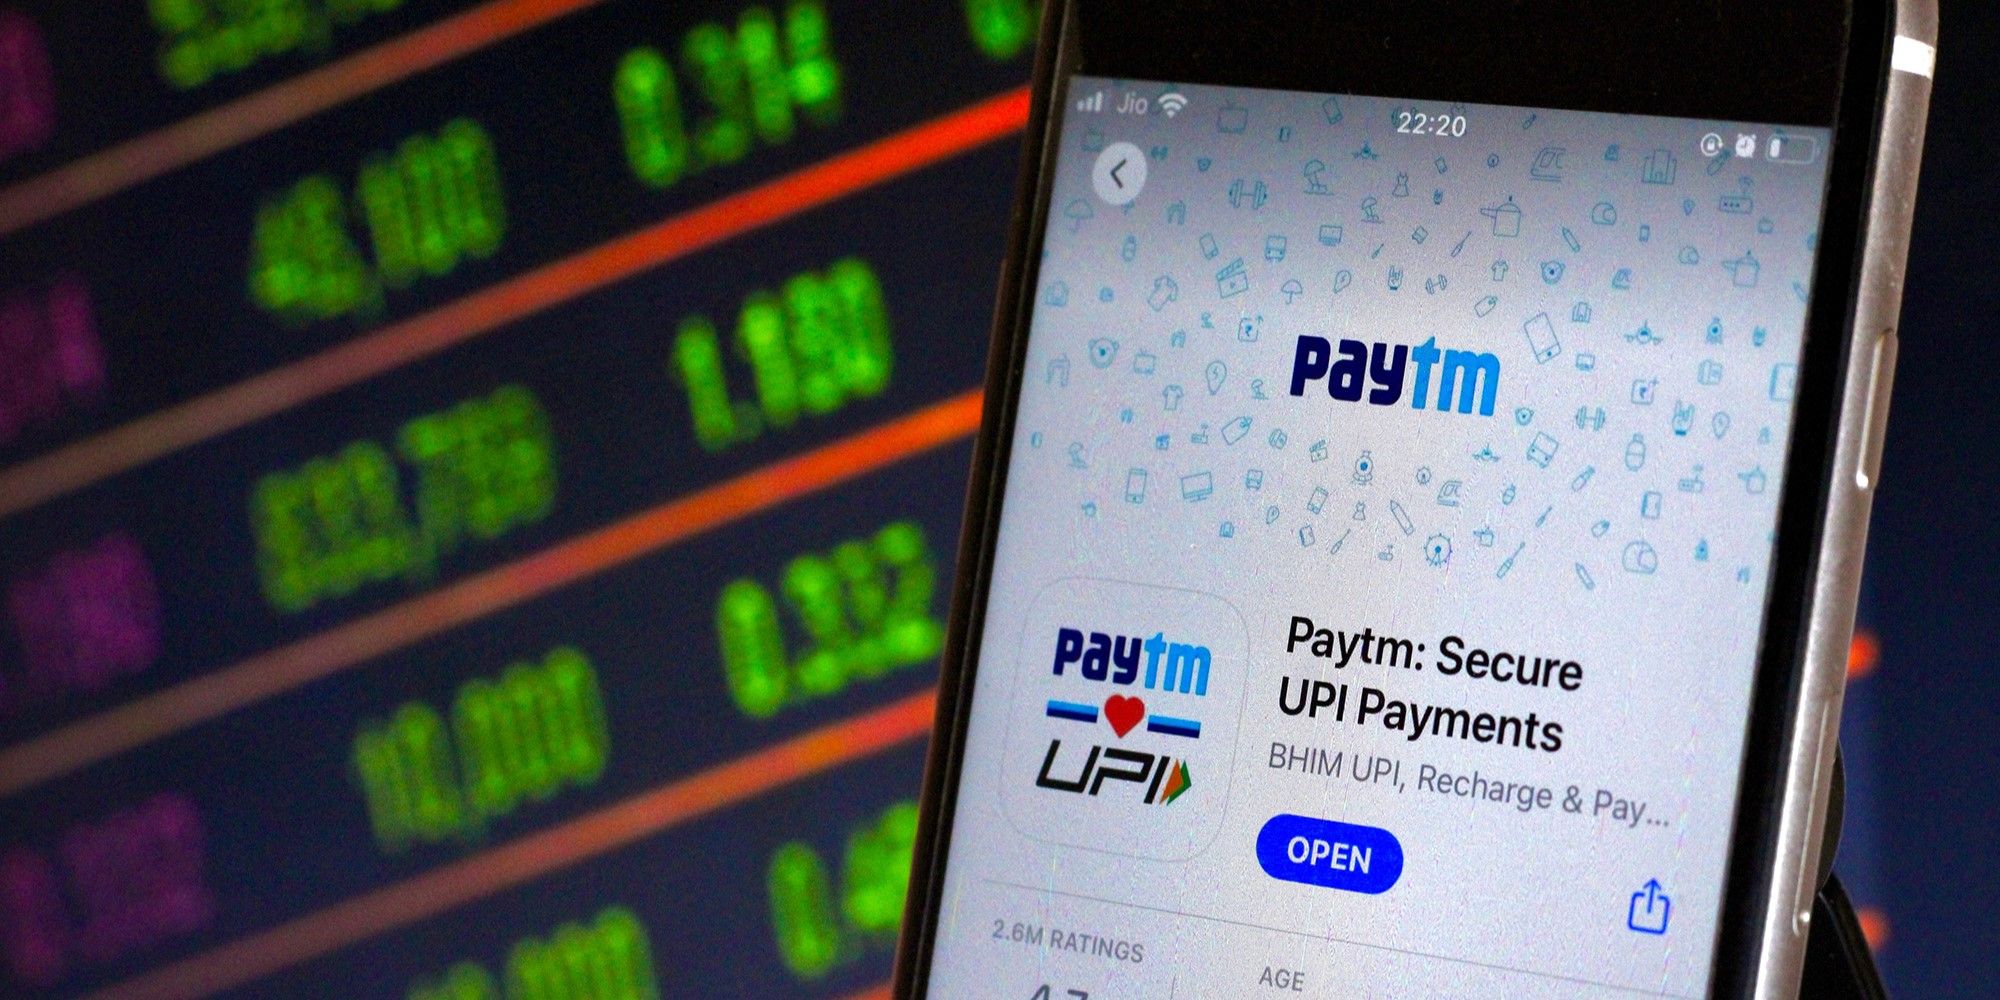 NPCI approves Paytm parent company to join as a UPI third-party app